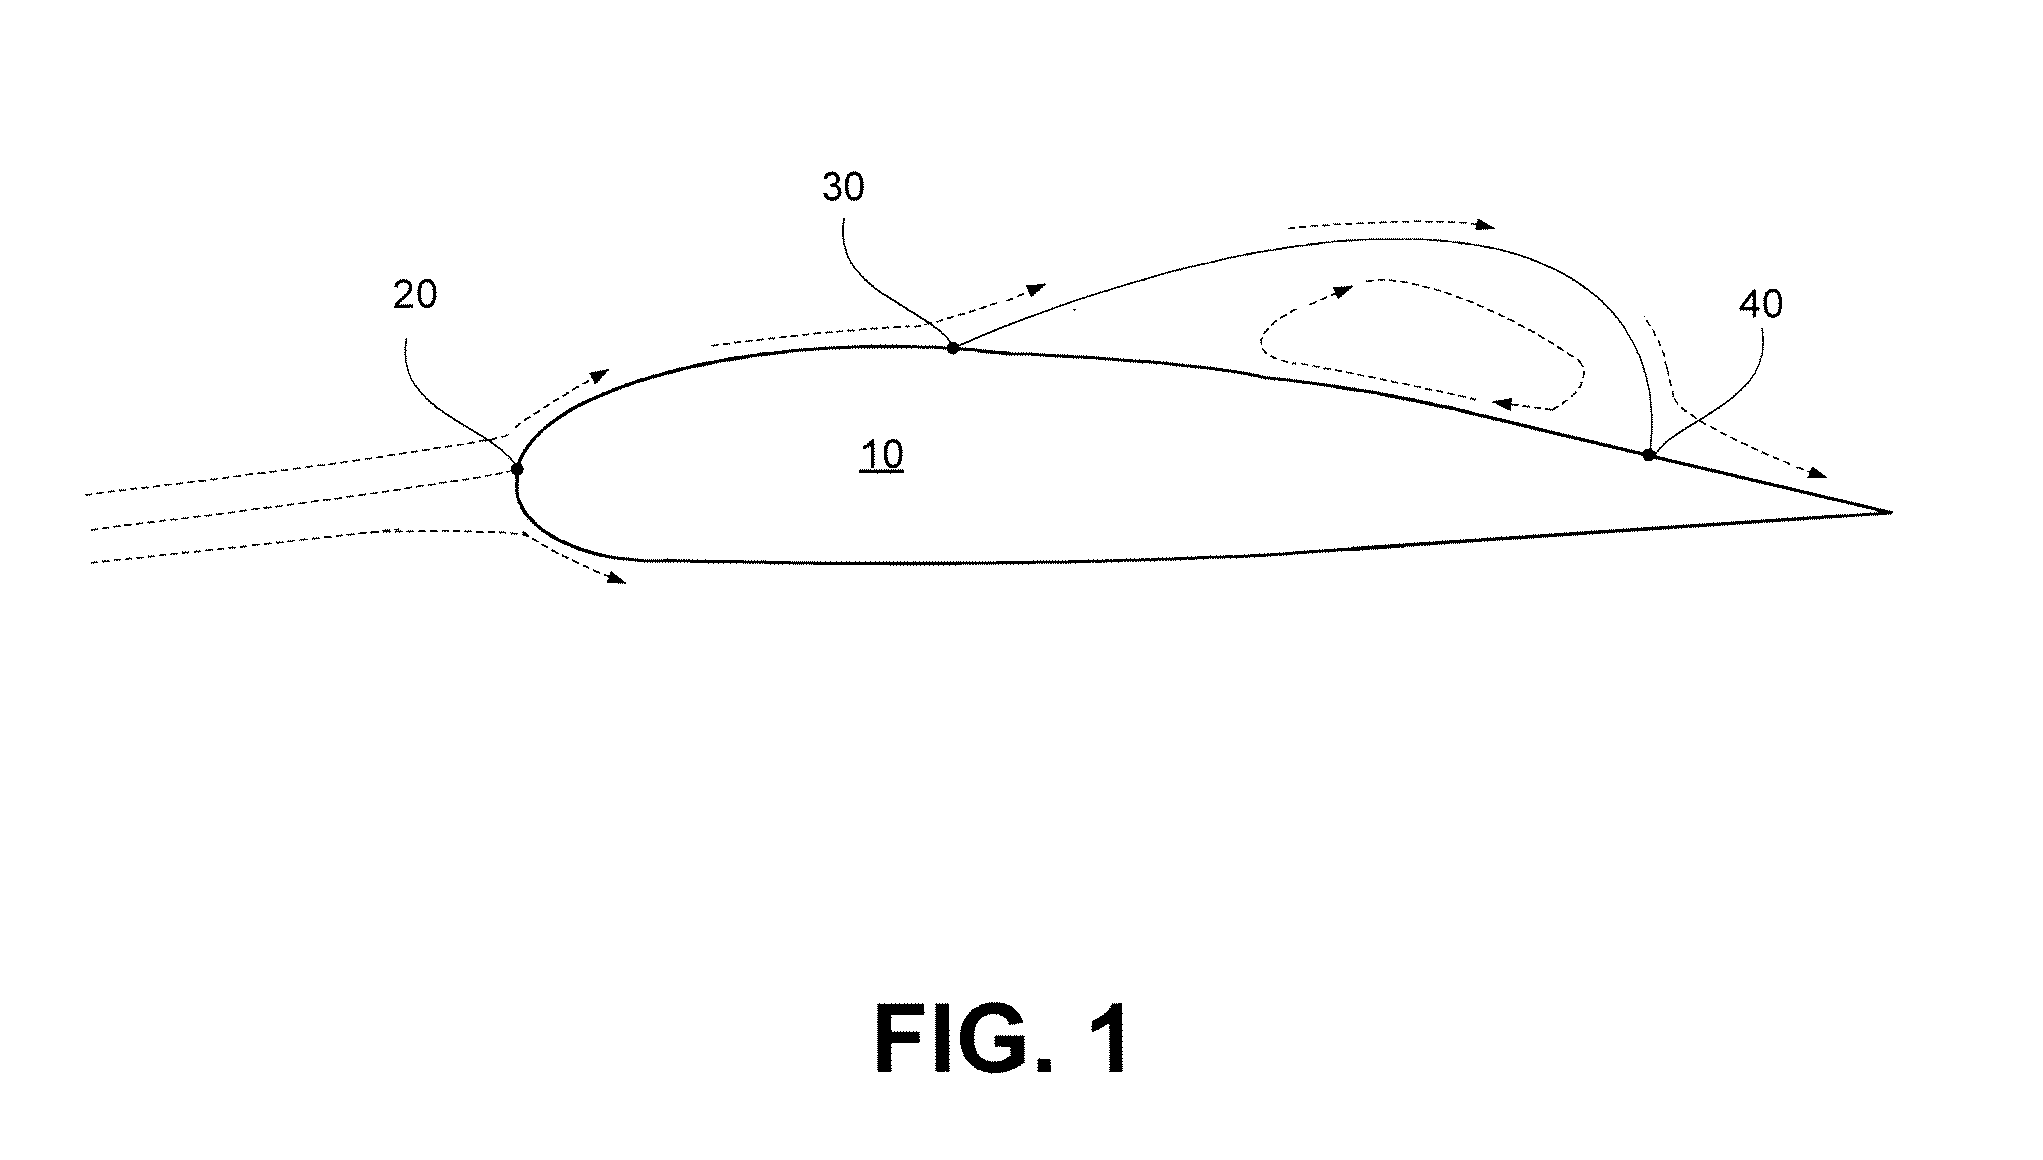 Method for Predicting Flow and Performance Characteristics of a Body Using Critical Point Location